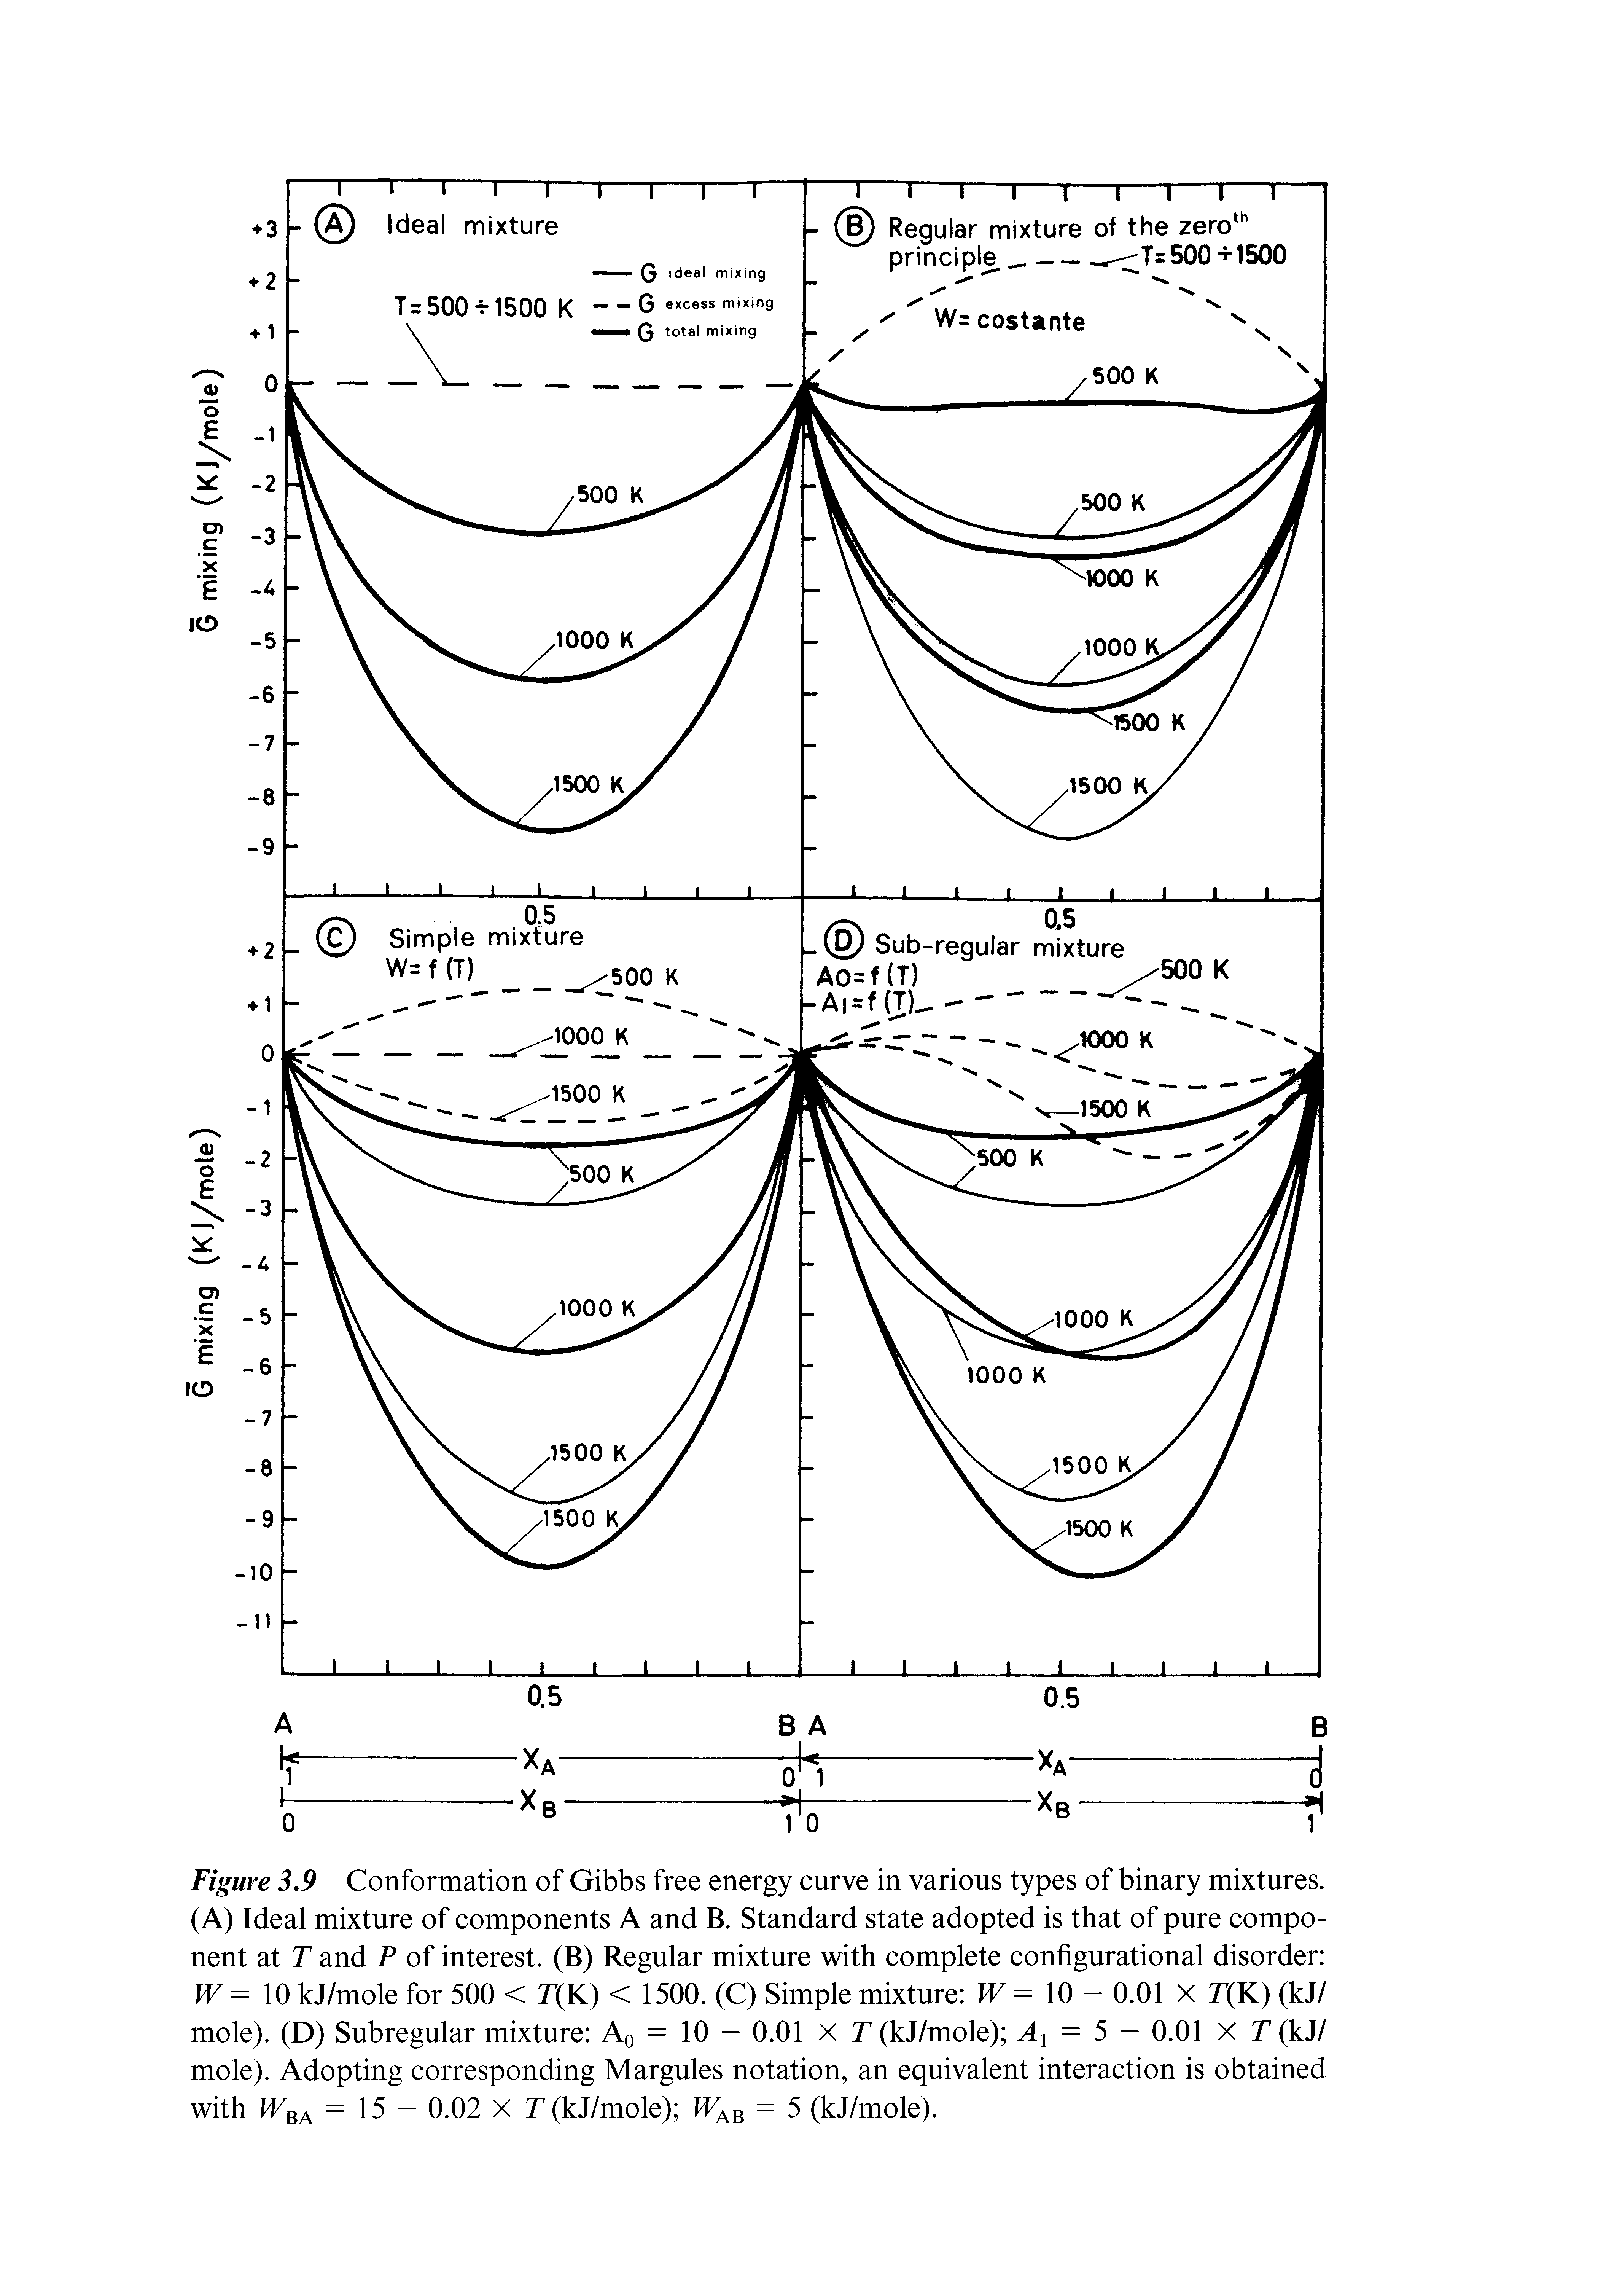 Figure 3.9 Conformation of Gibbs free energy curve in various types of binary mixtures. (A) Ideal mixture of components A and B. Standard state adopted is that of pure component at T and P of interest. (B) Regular mixture with complete configurational disorder kJ/mole for 500 < r(K) < 1500. (C) Simple mixture IF = 10 - 0.01 X r(K) (kJ/ mole). (D) Subregular mixture Aq = 10 — 0.01 X T (kJ/mole) = 5 — 0.01 X F (kJ/ mole). Adopting corresponding Margules notation, an equivalent interaction is obtained with IFba = 15 - 0.02 X r(kJ/mole) Bab = 5 (kJ/mole).